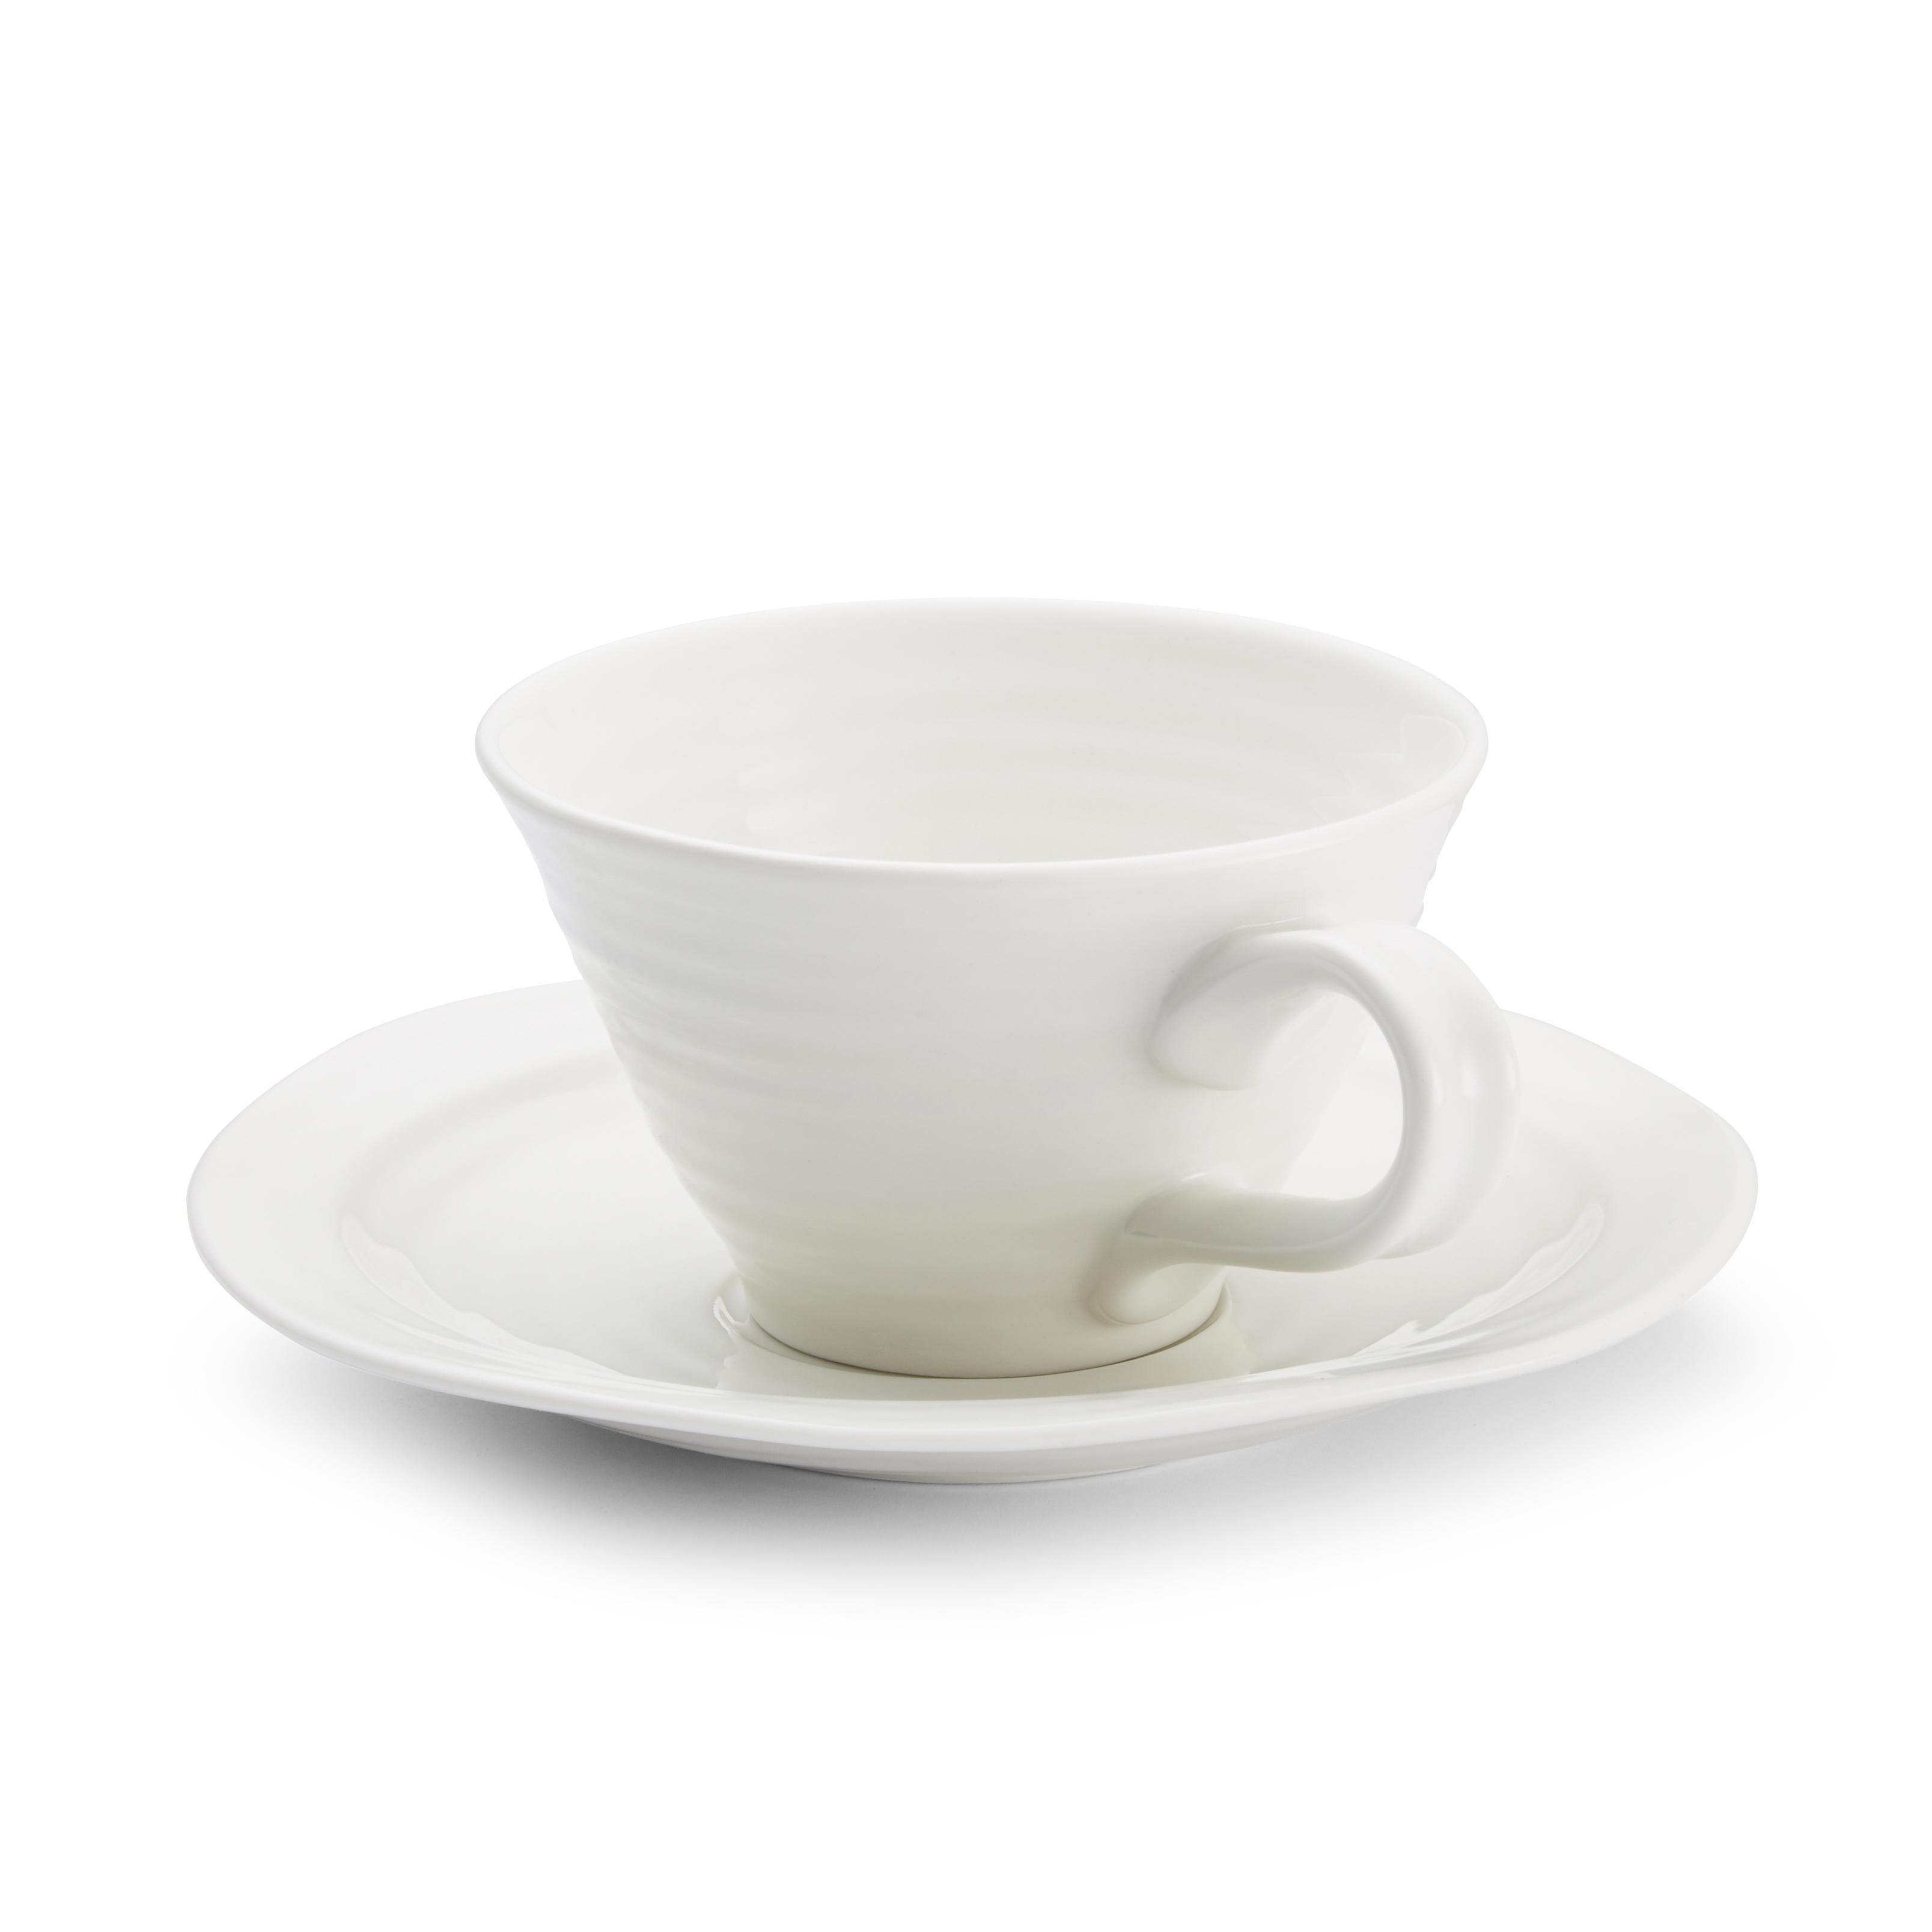 Sophie Conran White Teacups and Saucers Set of 4 image number null